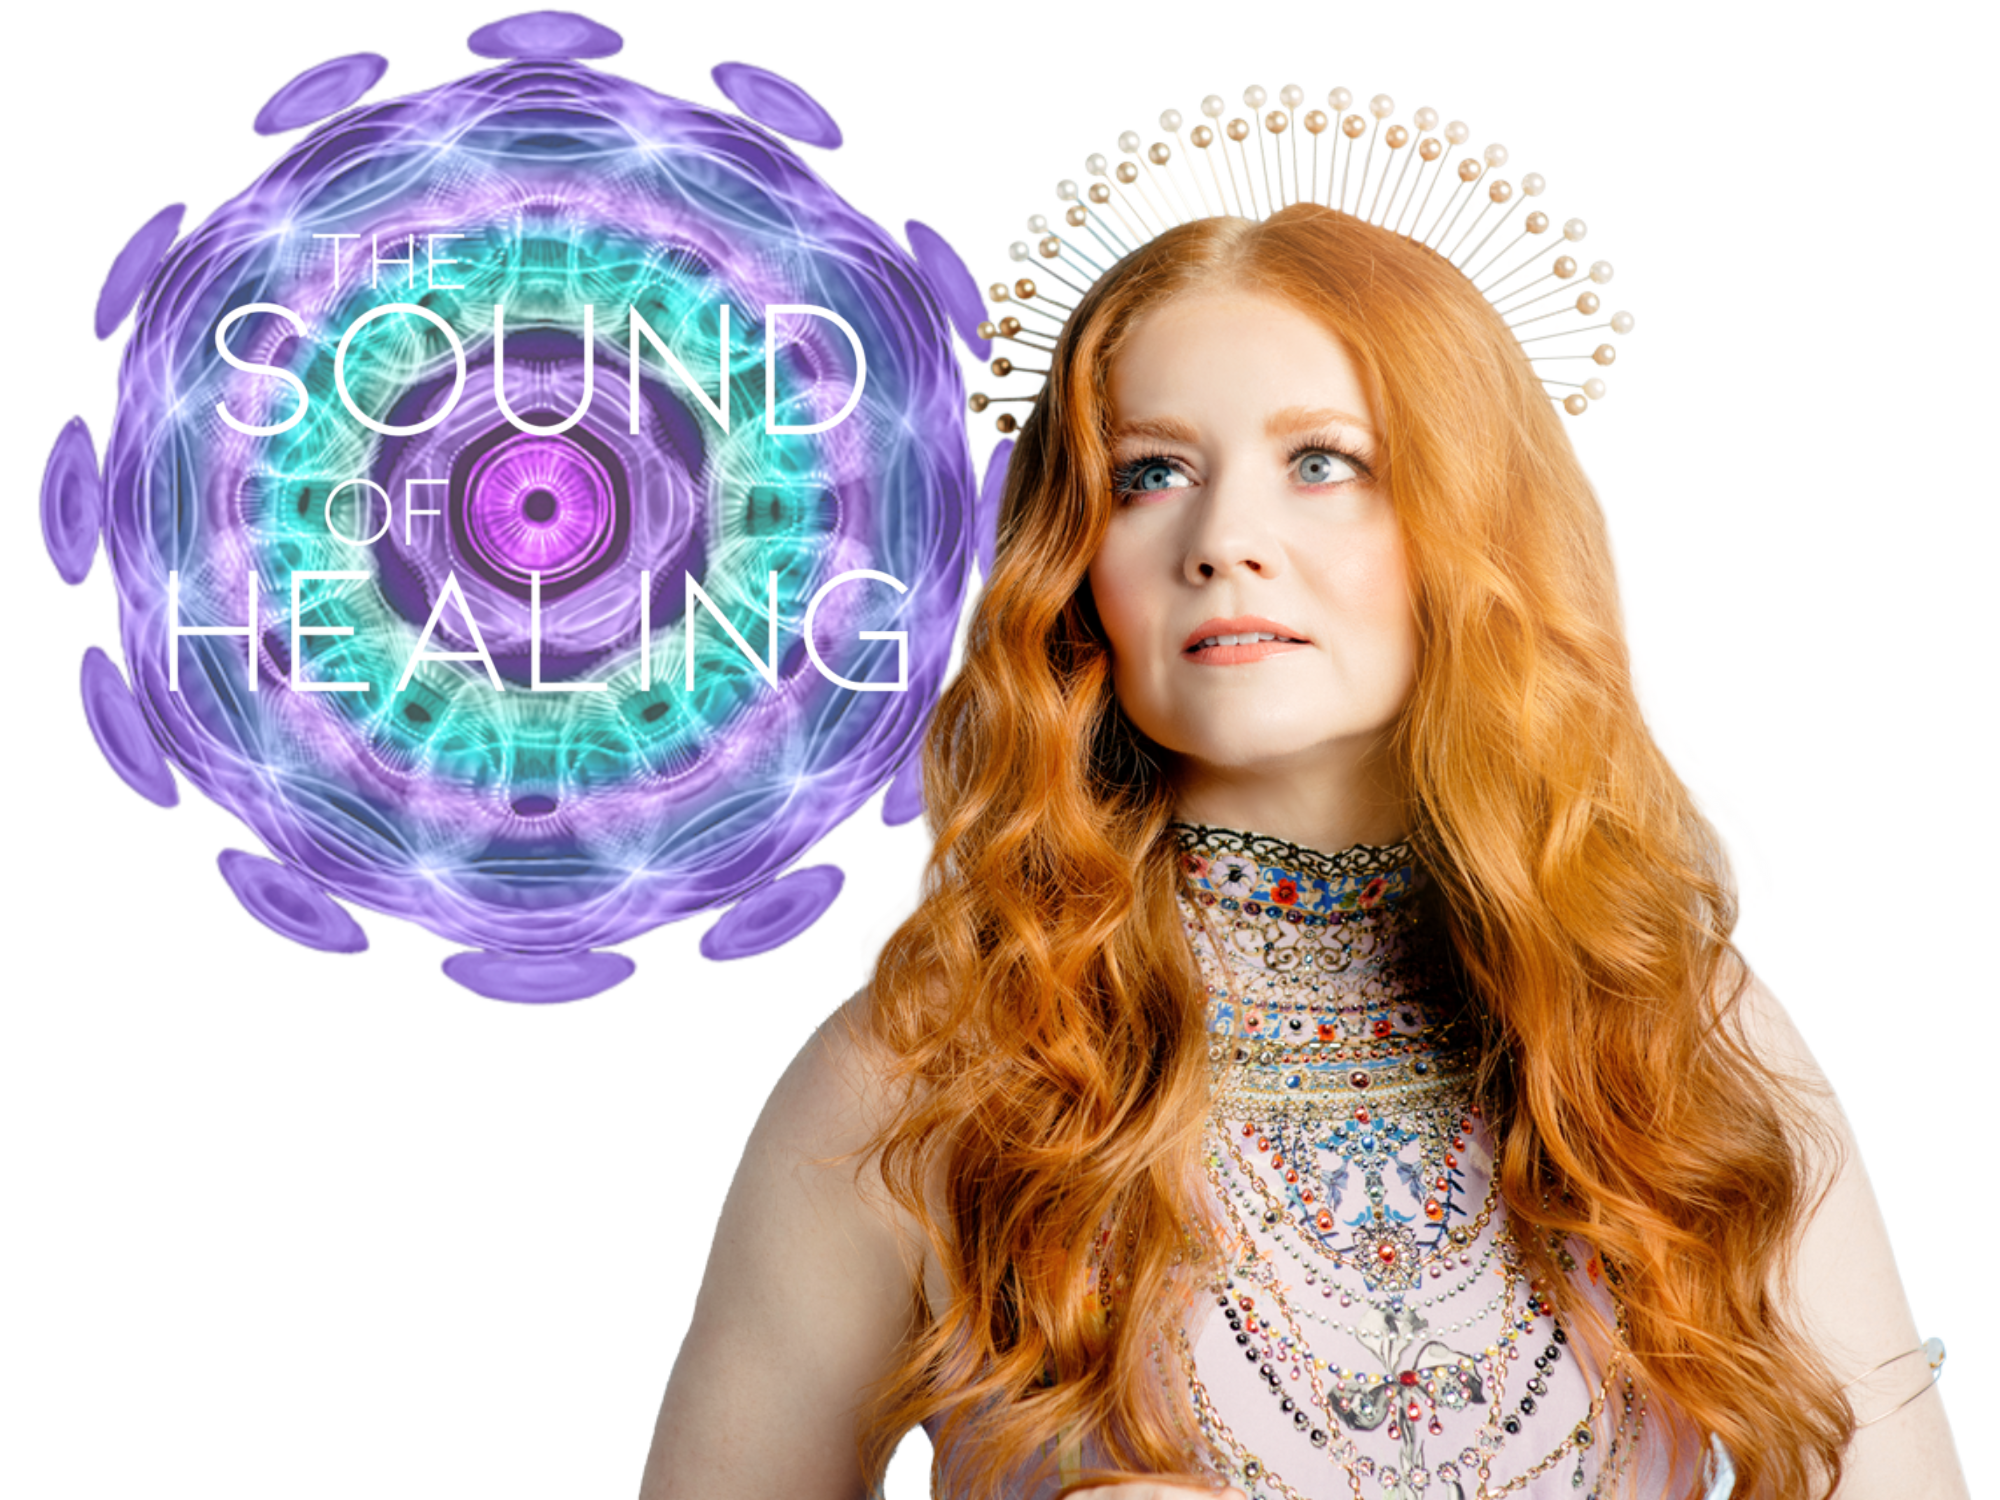 Charleene Closshey with cymatics and text "the sound of healing"